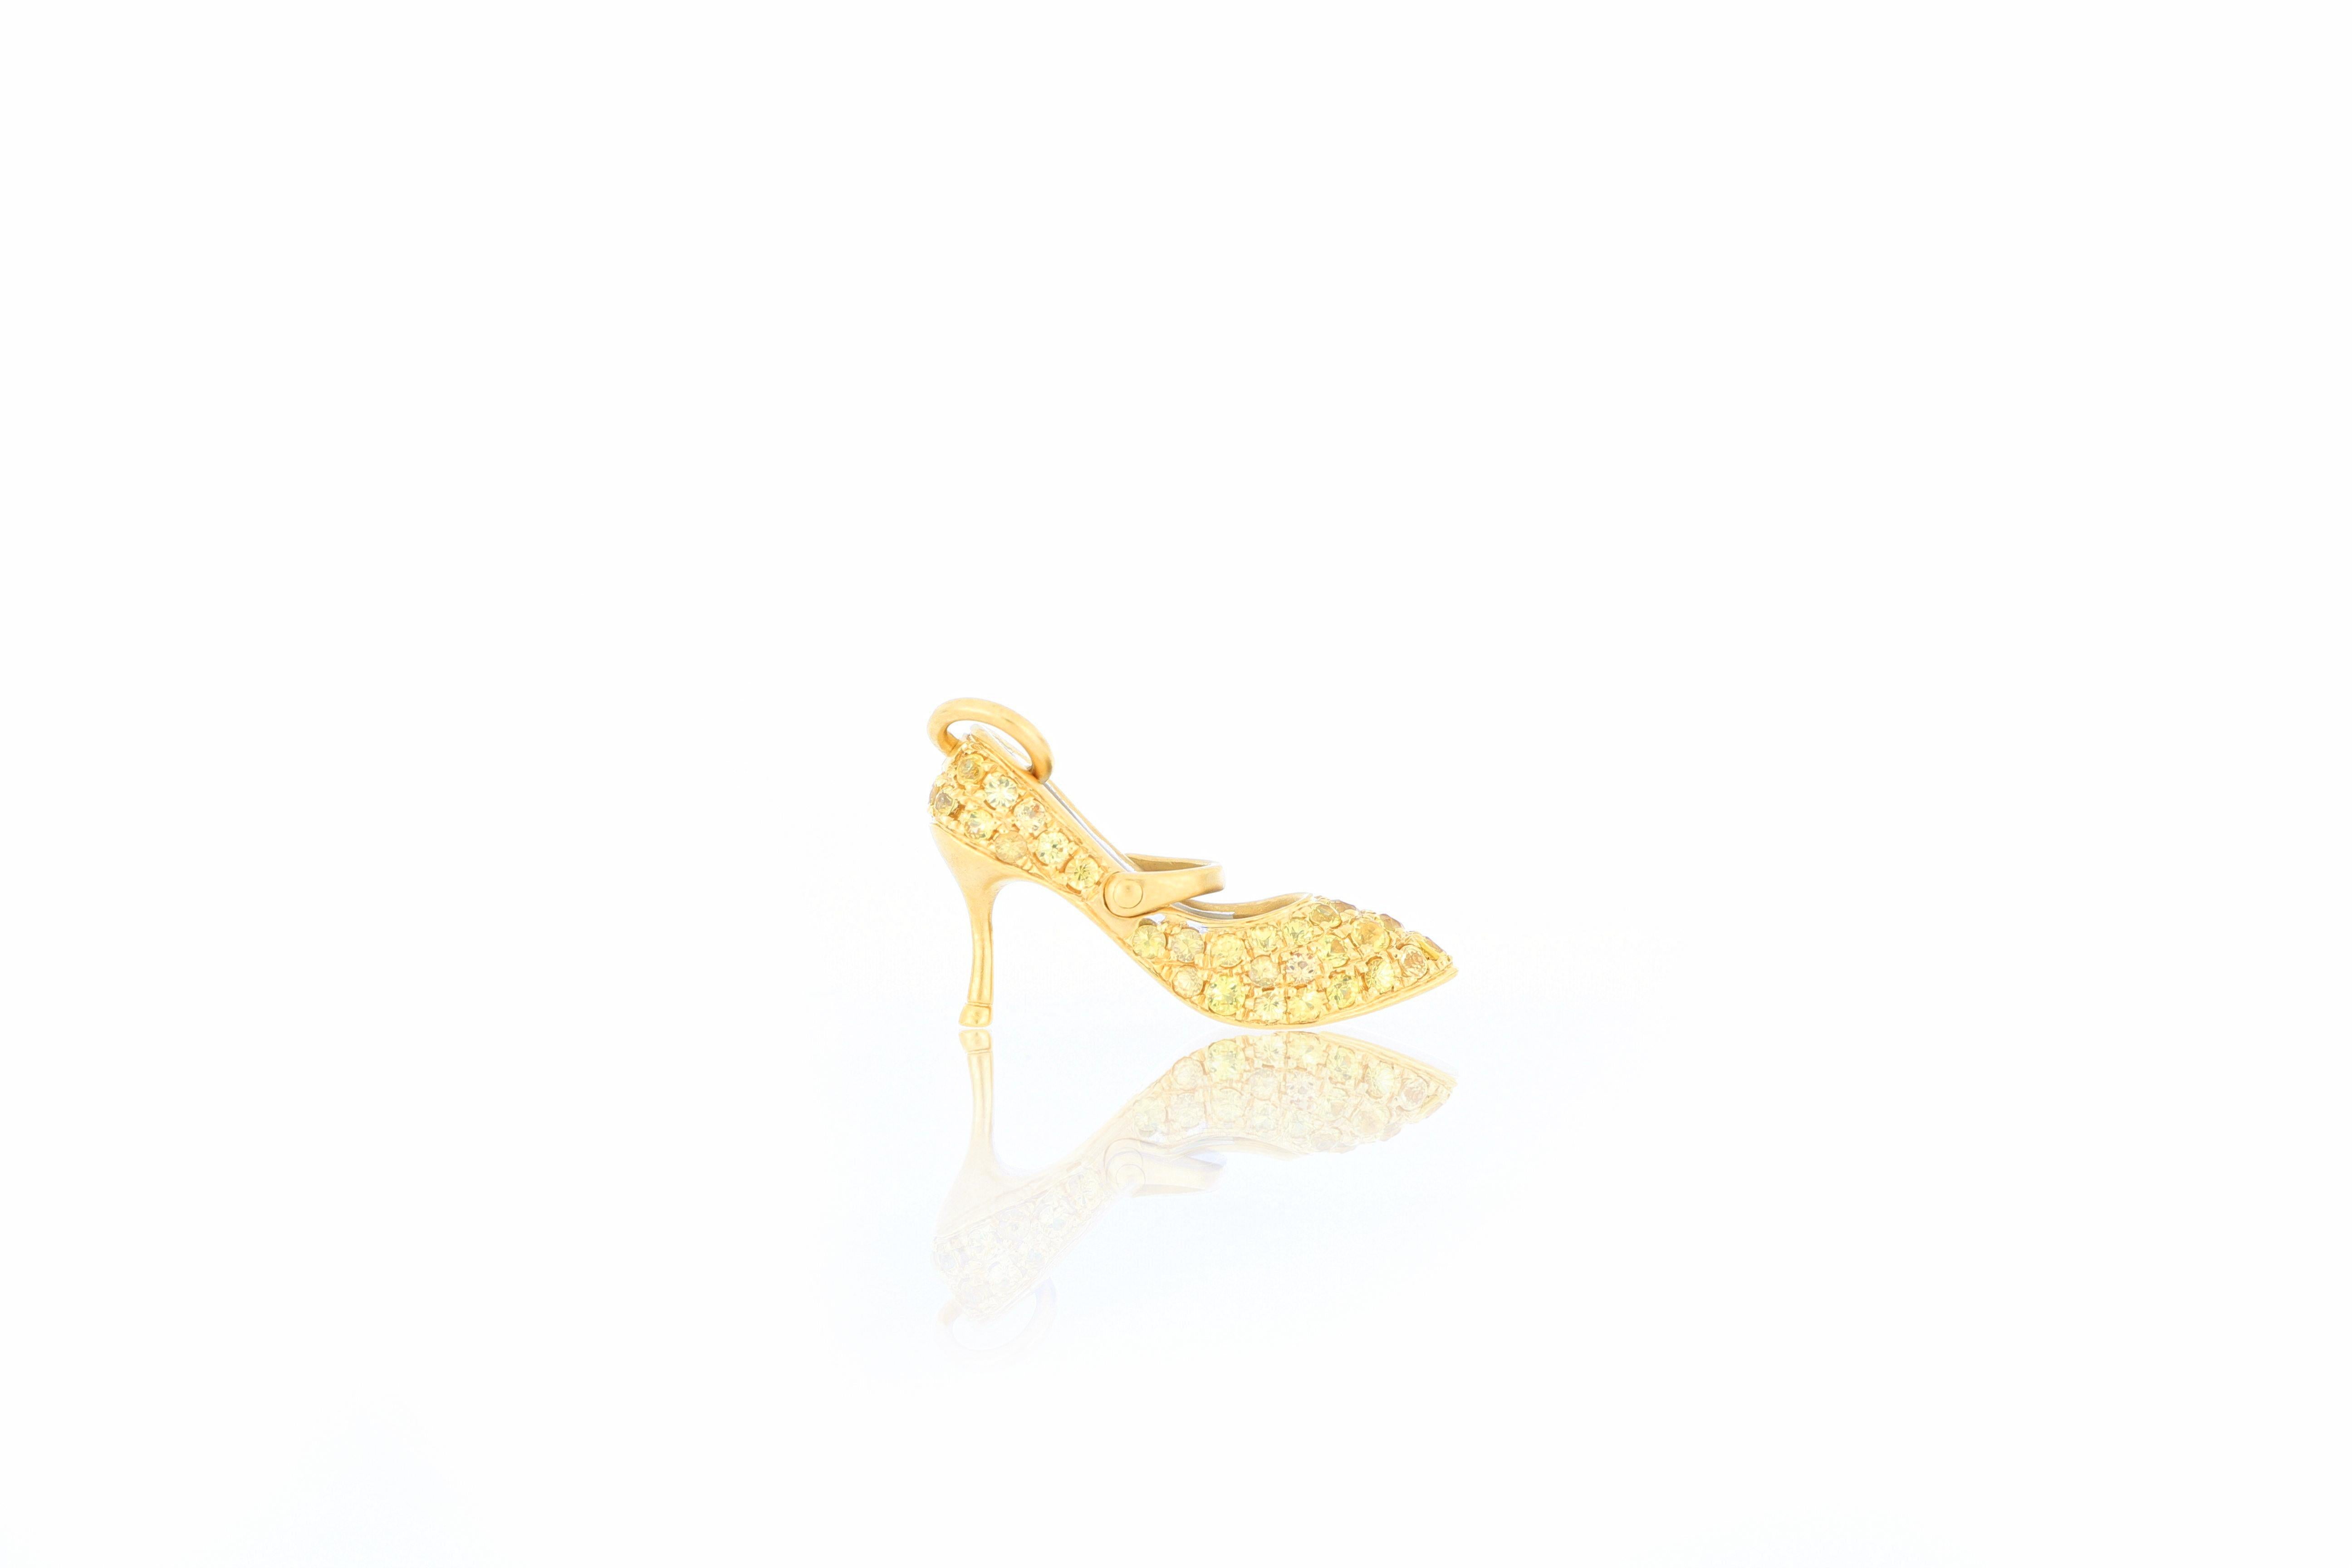 An elegant and very special high heel shoe pendant, set with yellow sapphire  weighing 0.59 carats, mounted in 18 Karat gold. 
O’Che 1867 was founded one and a half centuries ago in Macau. The brand is renowned for its high jewellery collections